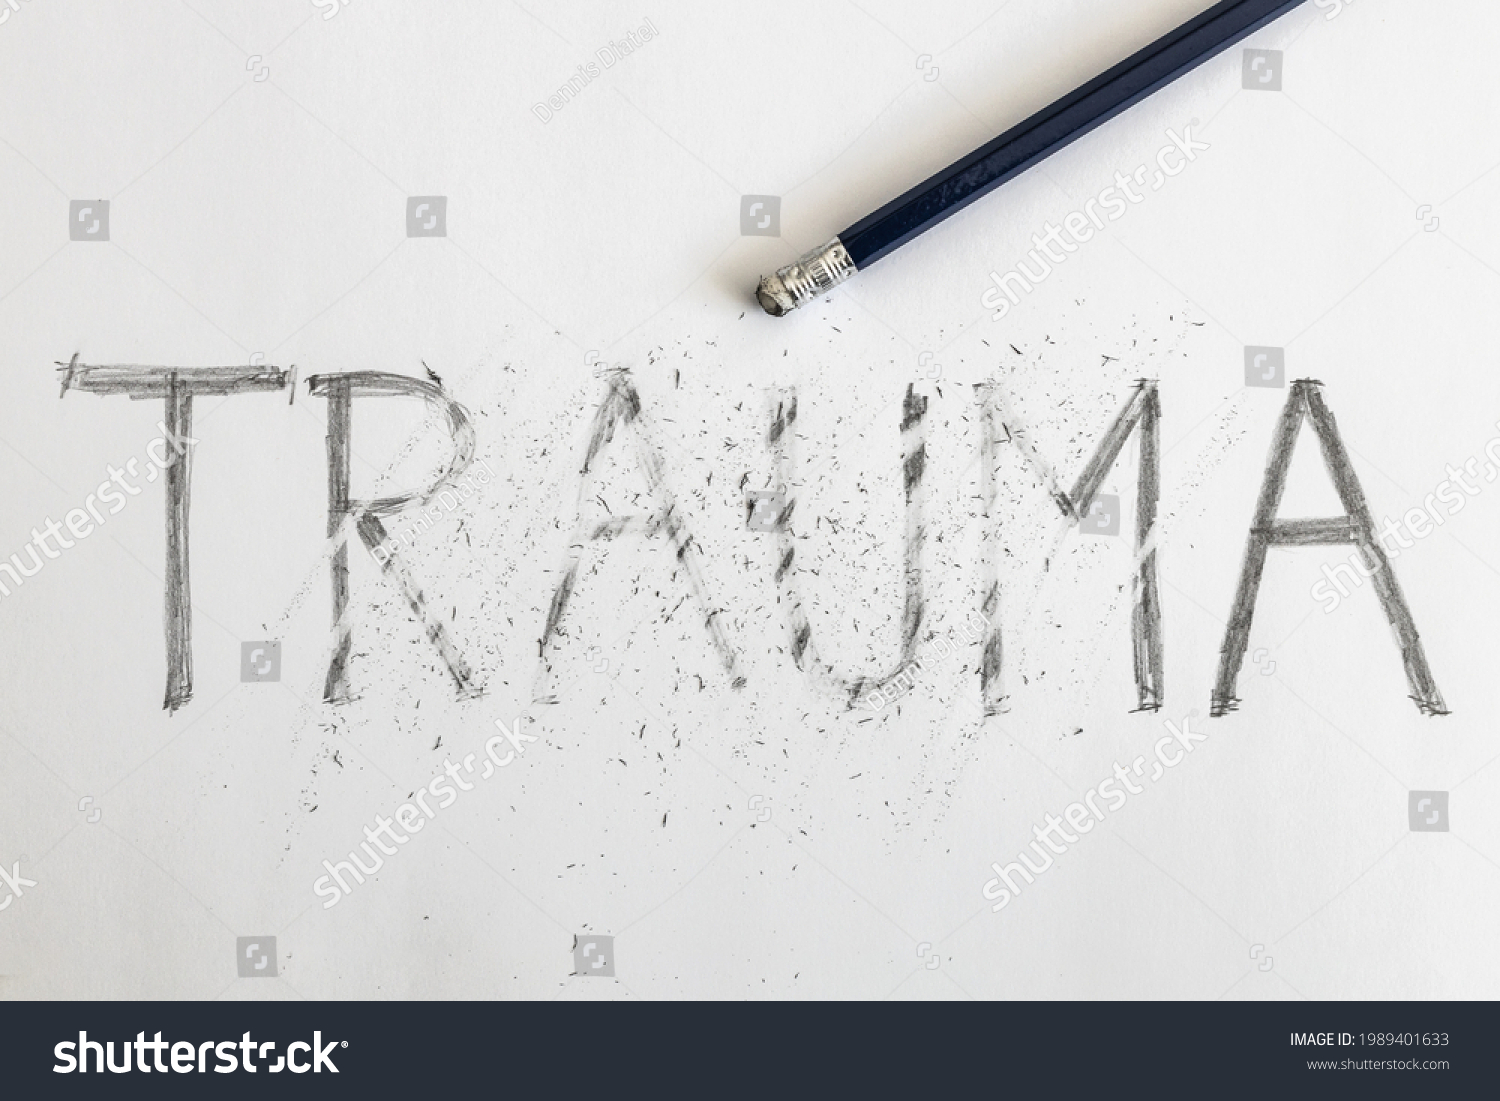 Erasing trauma. Trauma written on white paper with a pencil, partially erased with an eraser. Symbolic for overcoming trauma or treating trauma.   #1989401633